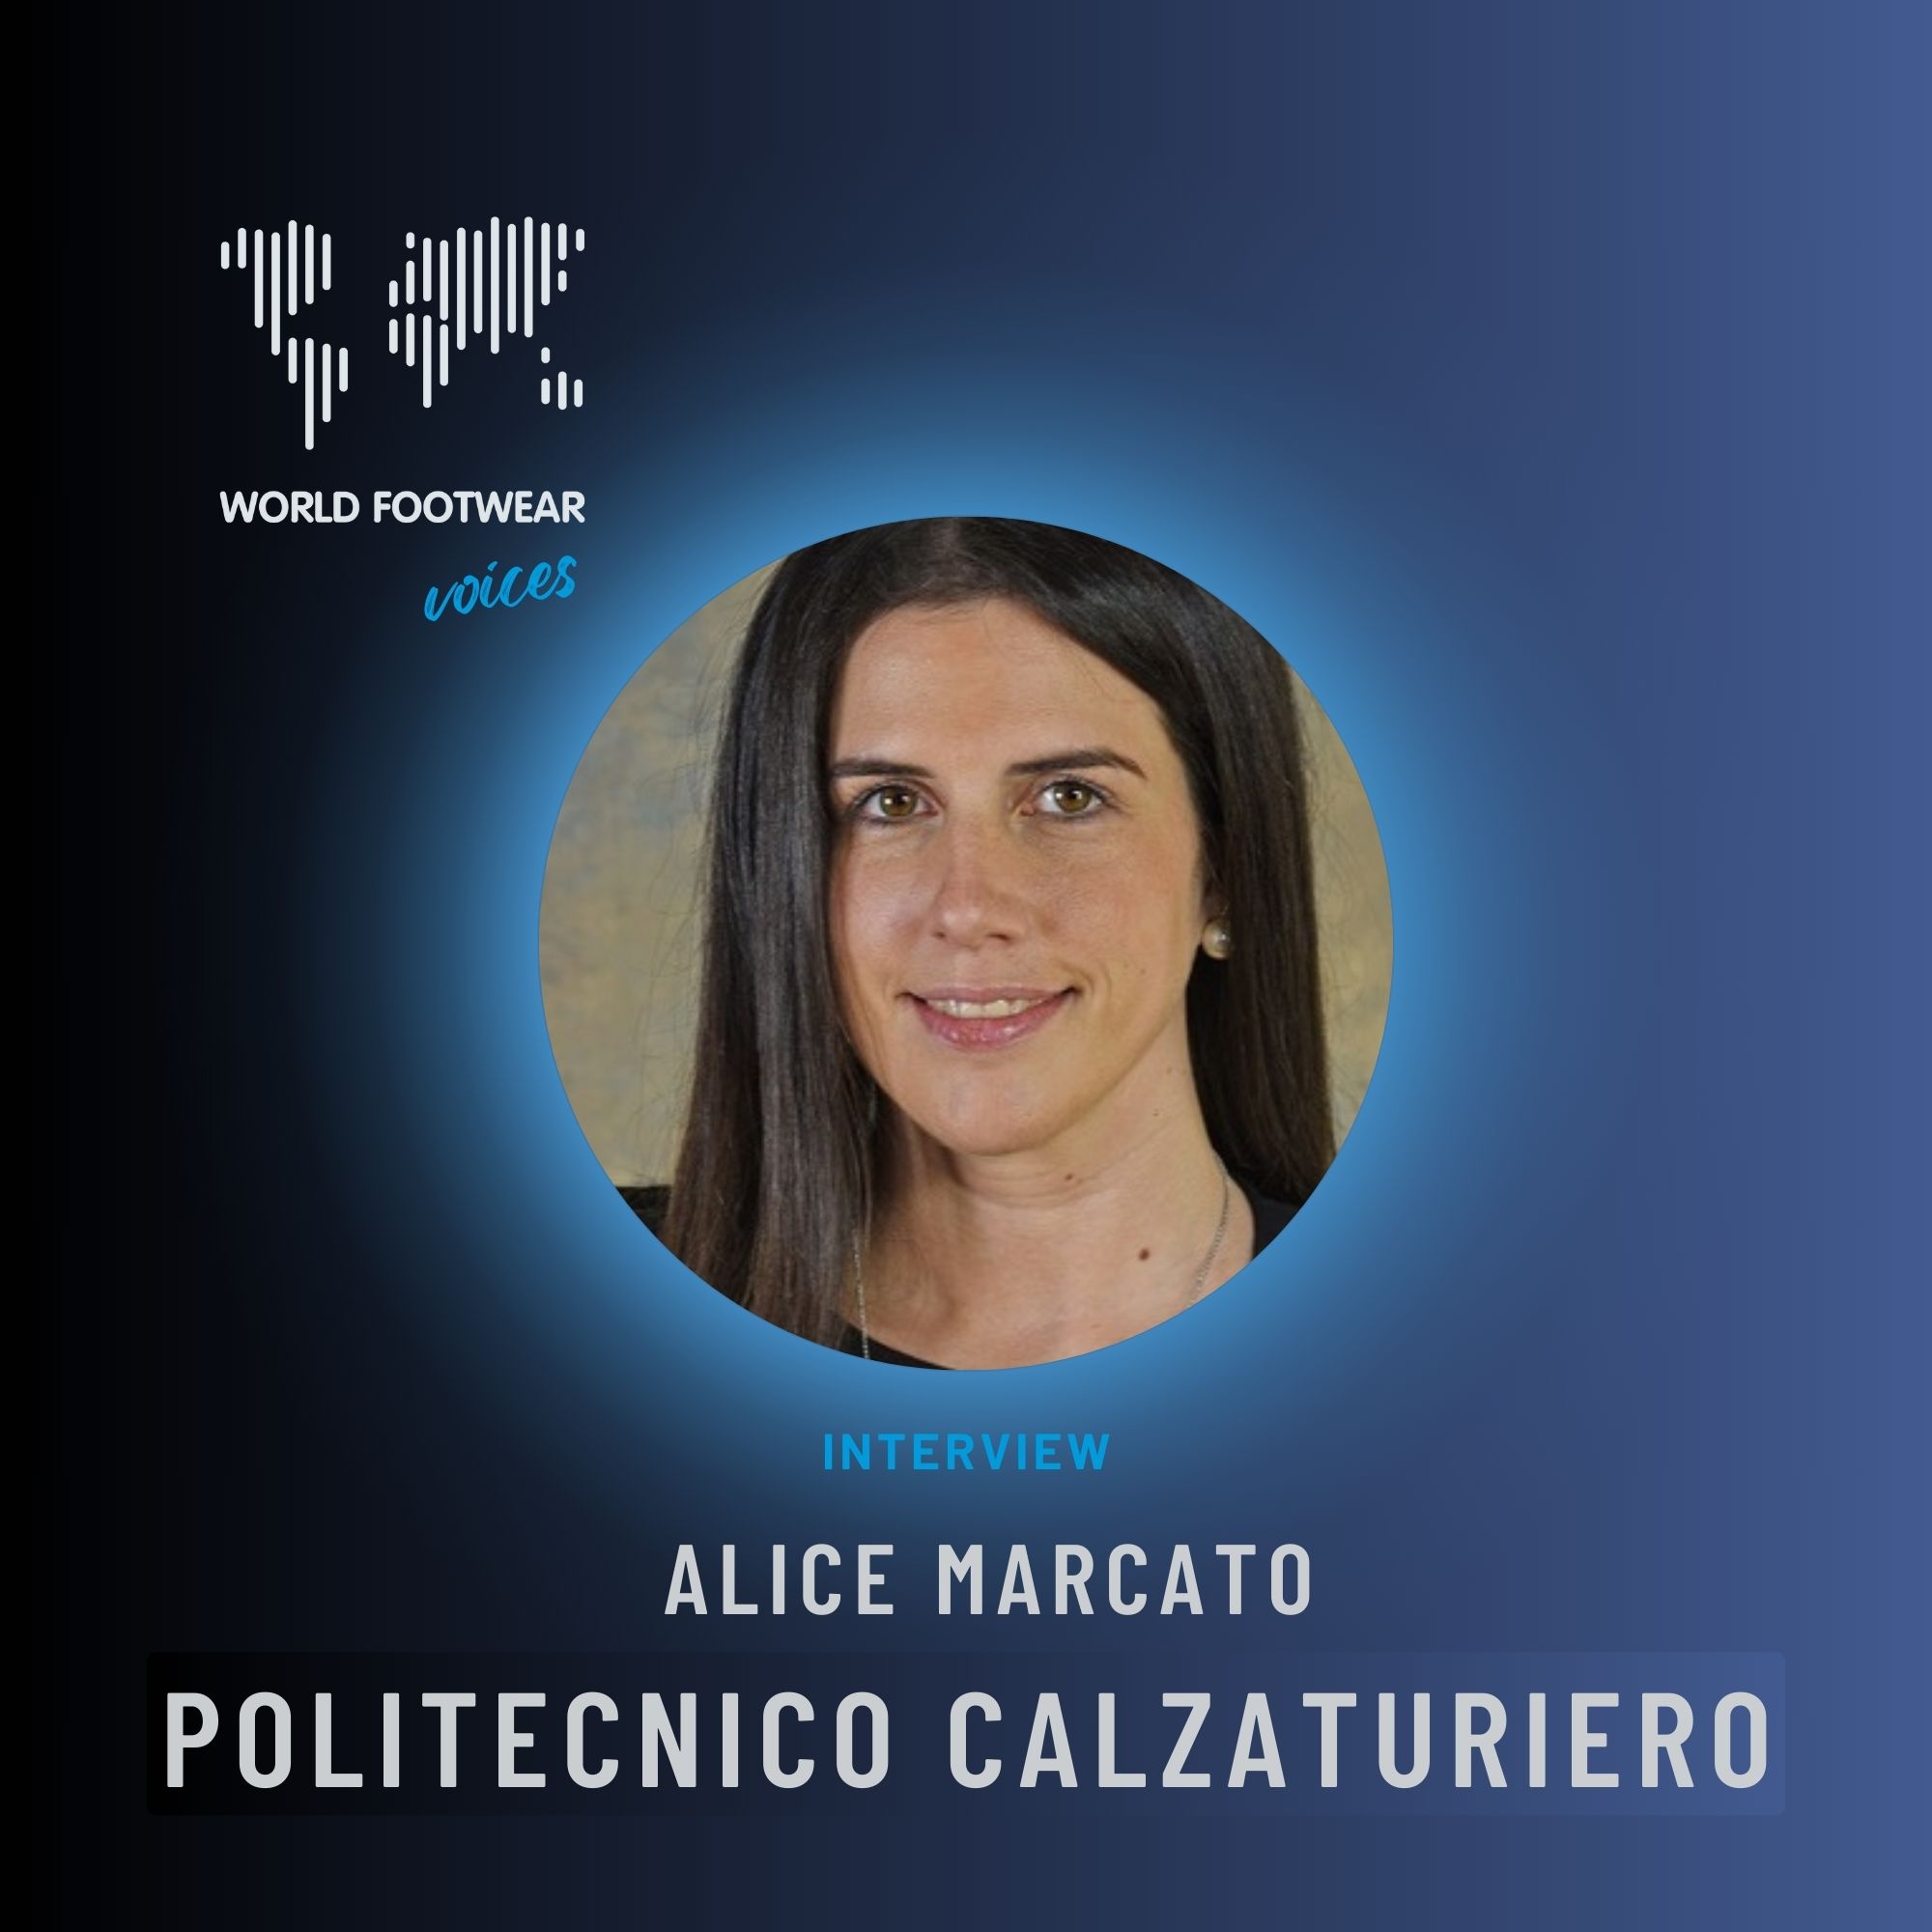 World Footwear Voices: interview with Alice Marcato from Politecnico Calzaturiero 